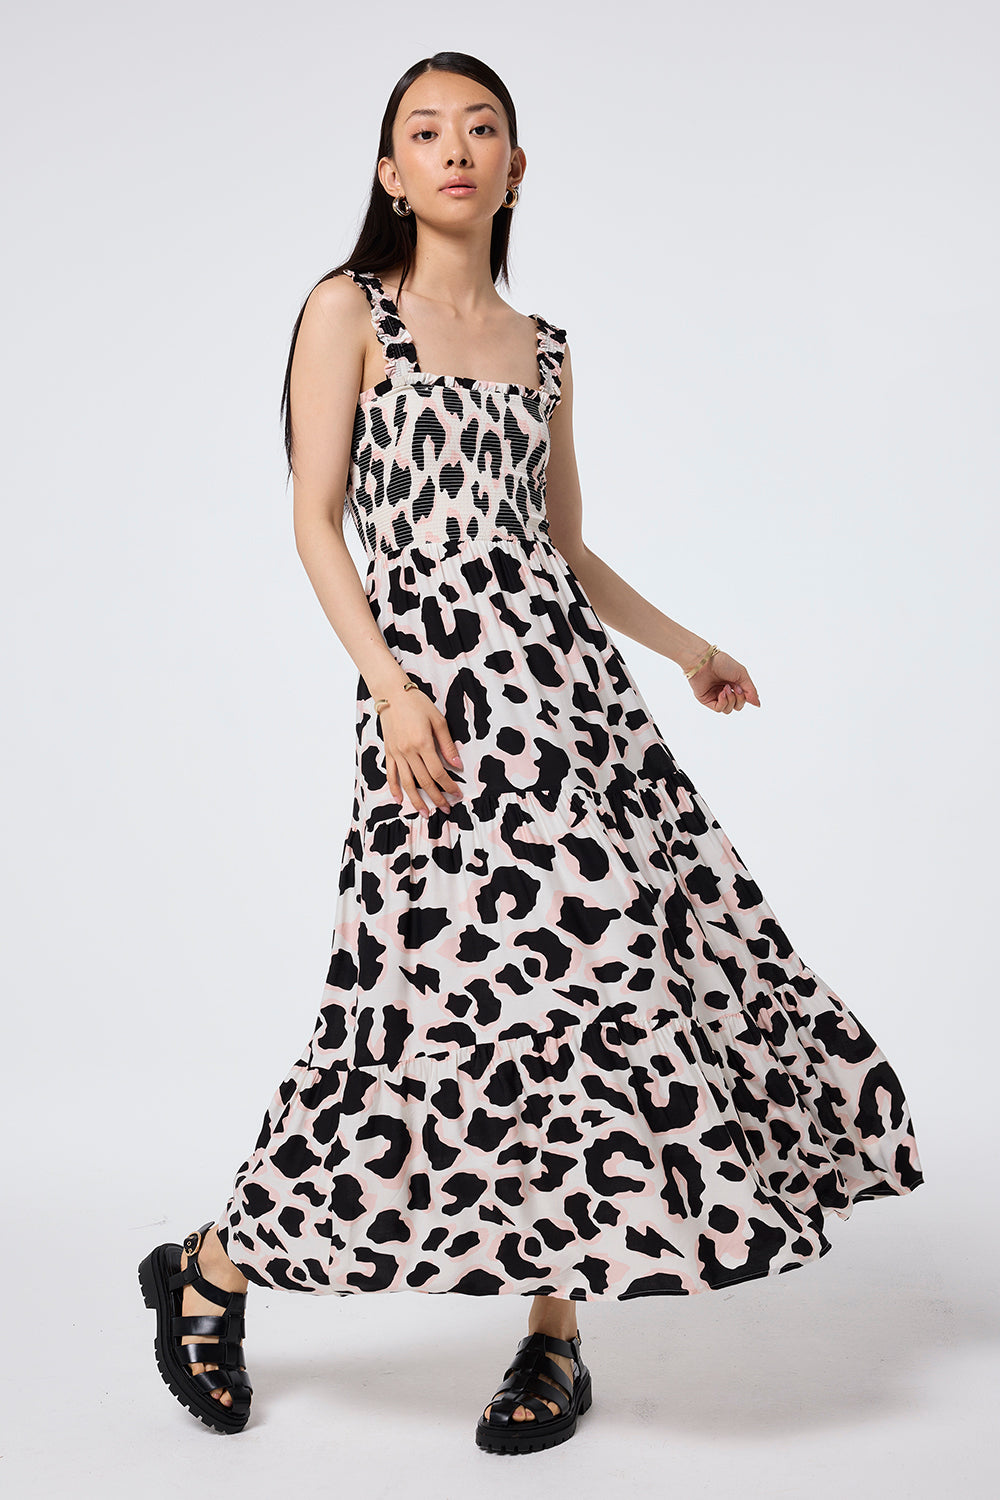 COMING SOON: Ivory with Neutral and Black Mega Shadow Leopard Maxi Sundress